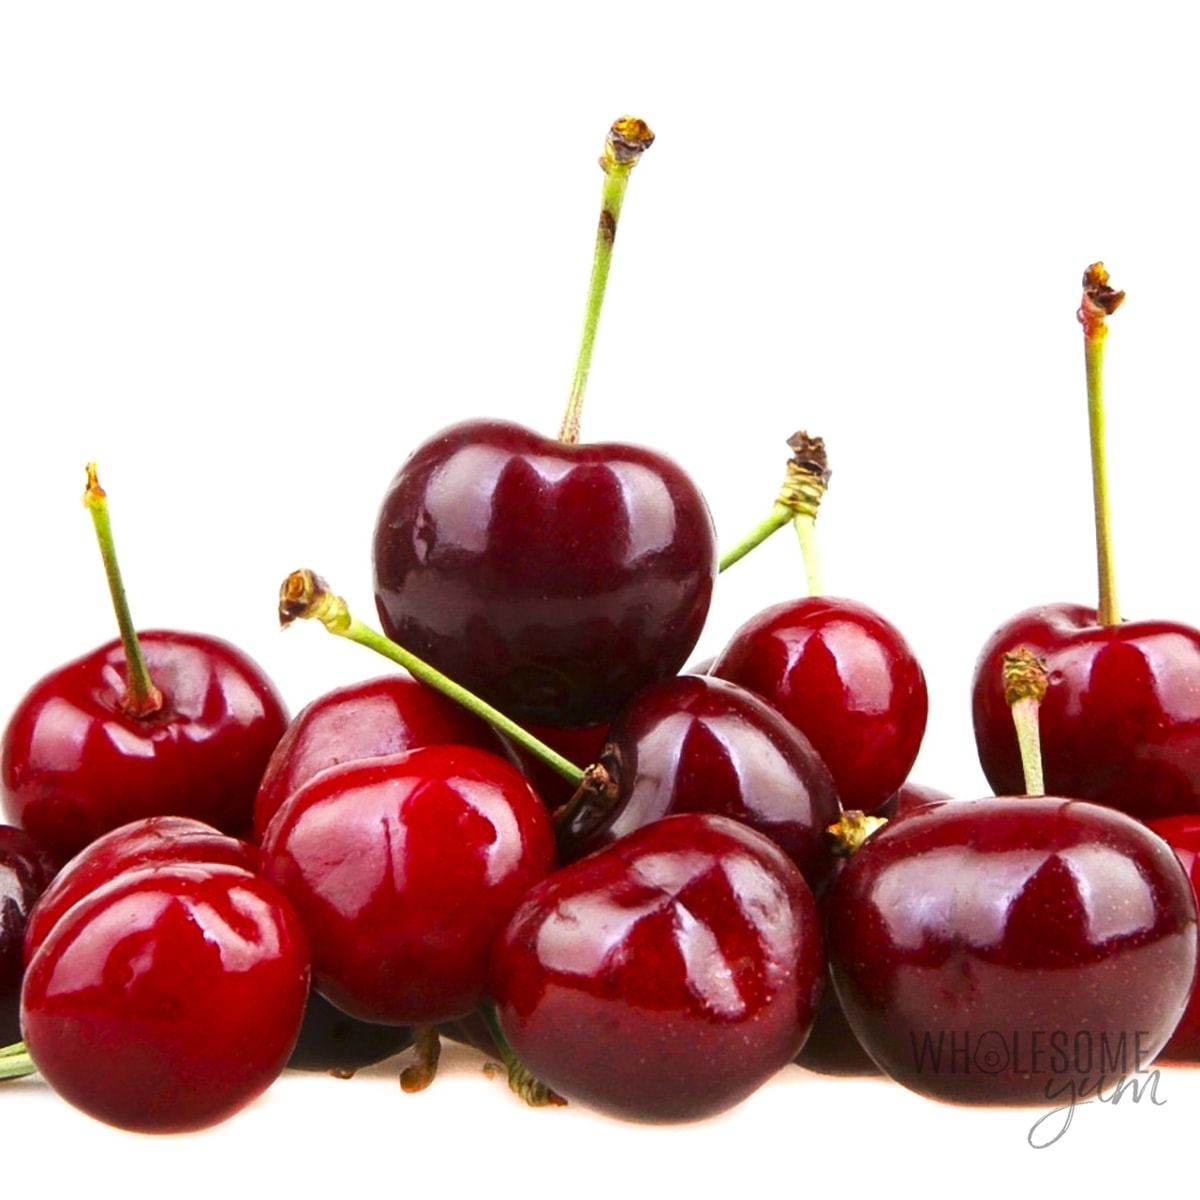 Are cherries keto, or are carbs in cherries too high? These fresh cherries are not very keto friendly.